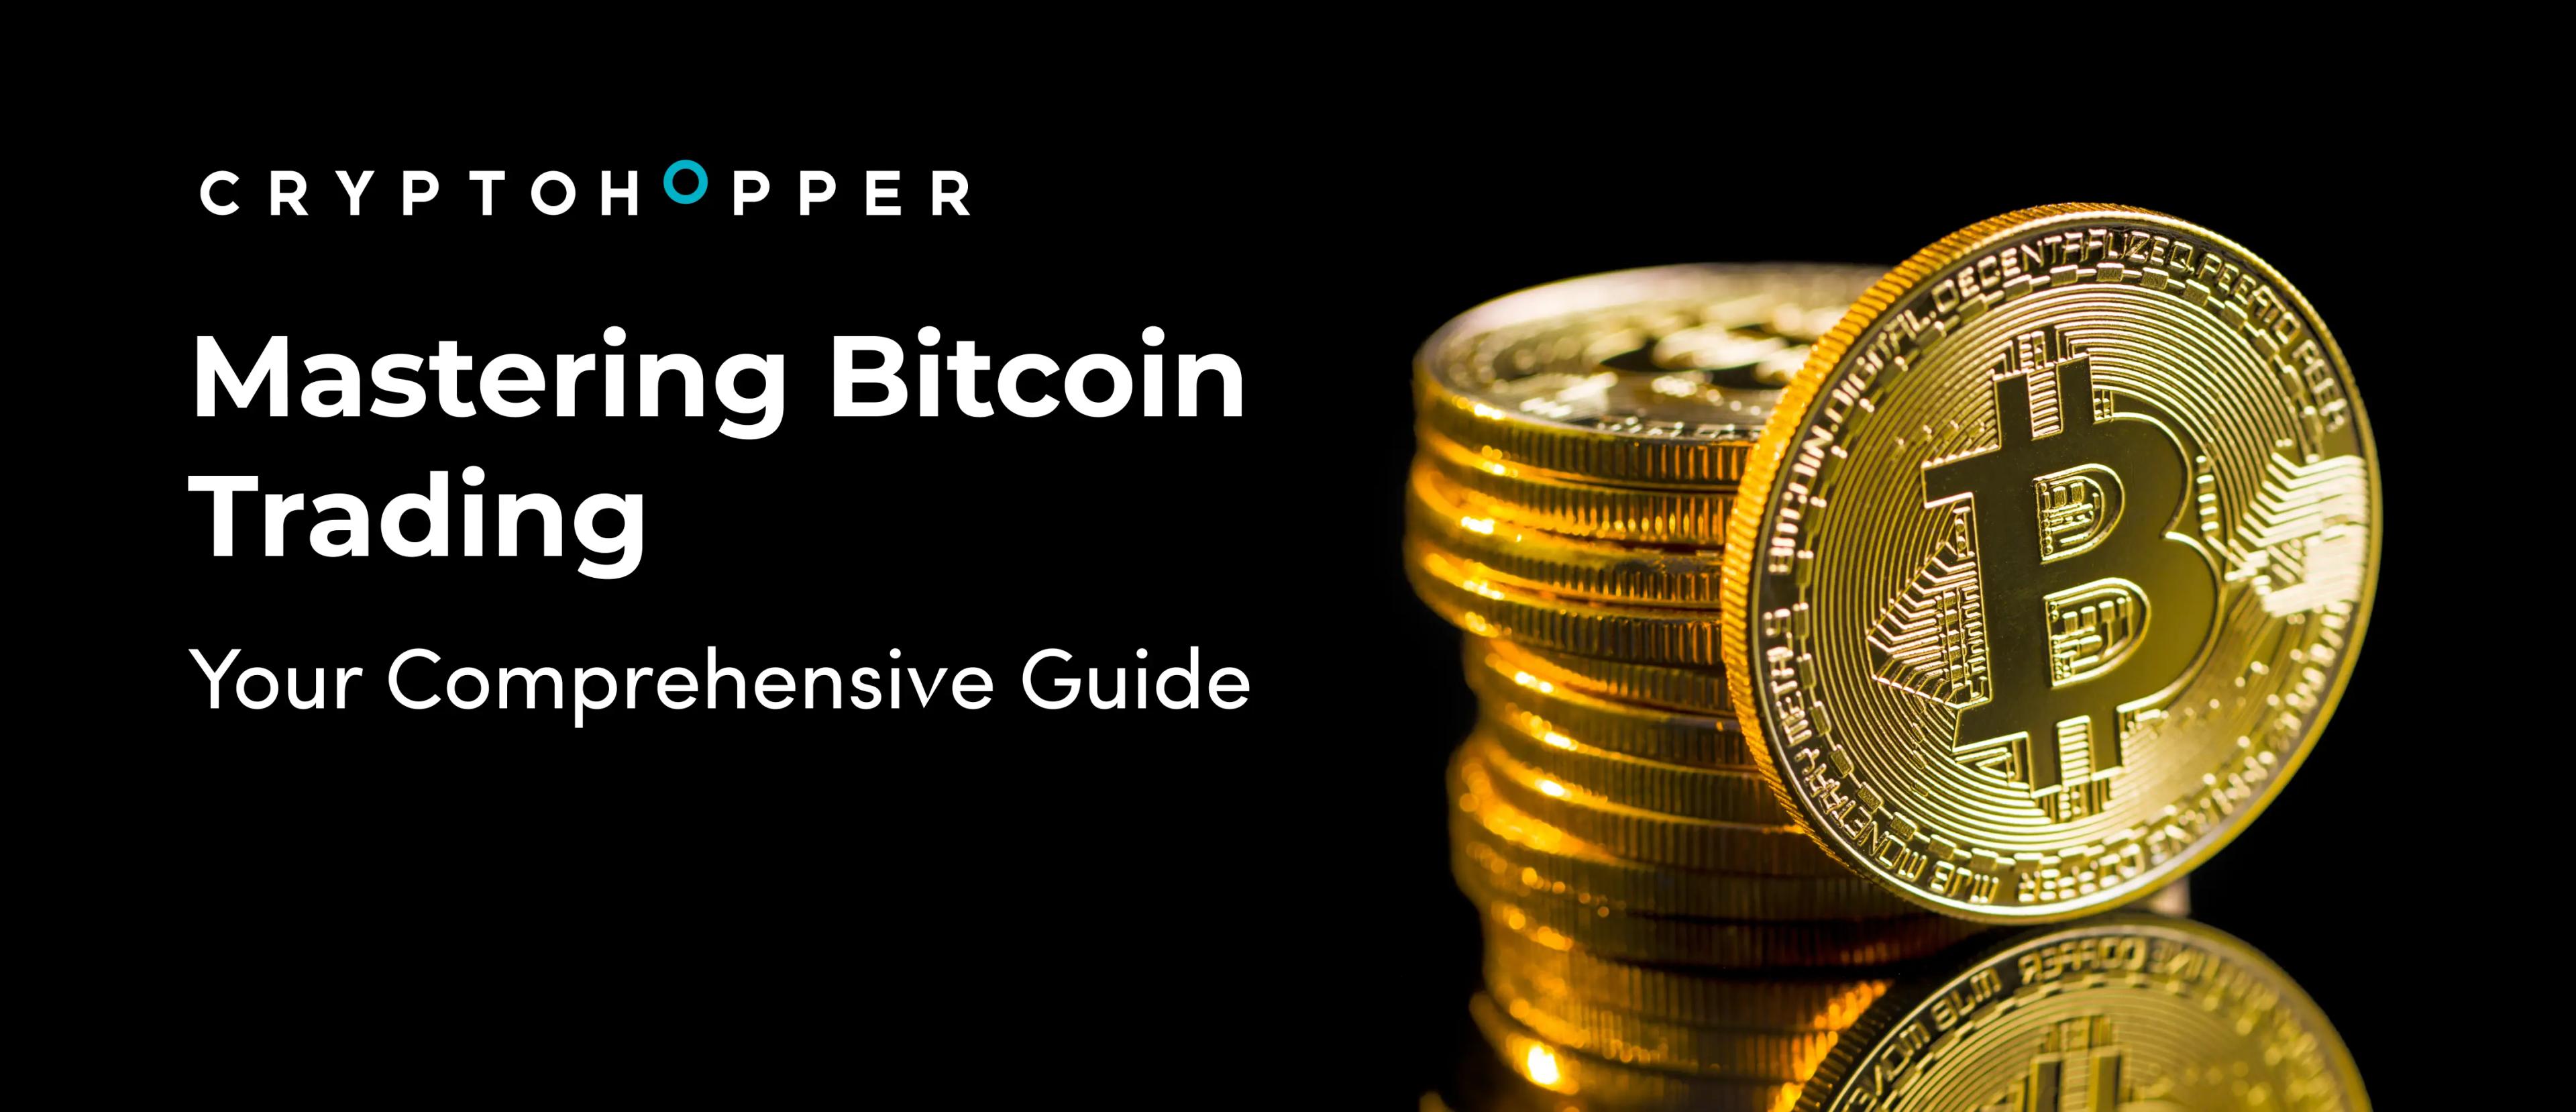 Mastering Bitcoin Trading: Your Comprehensive Guide